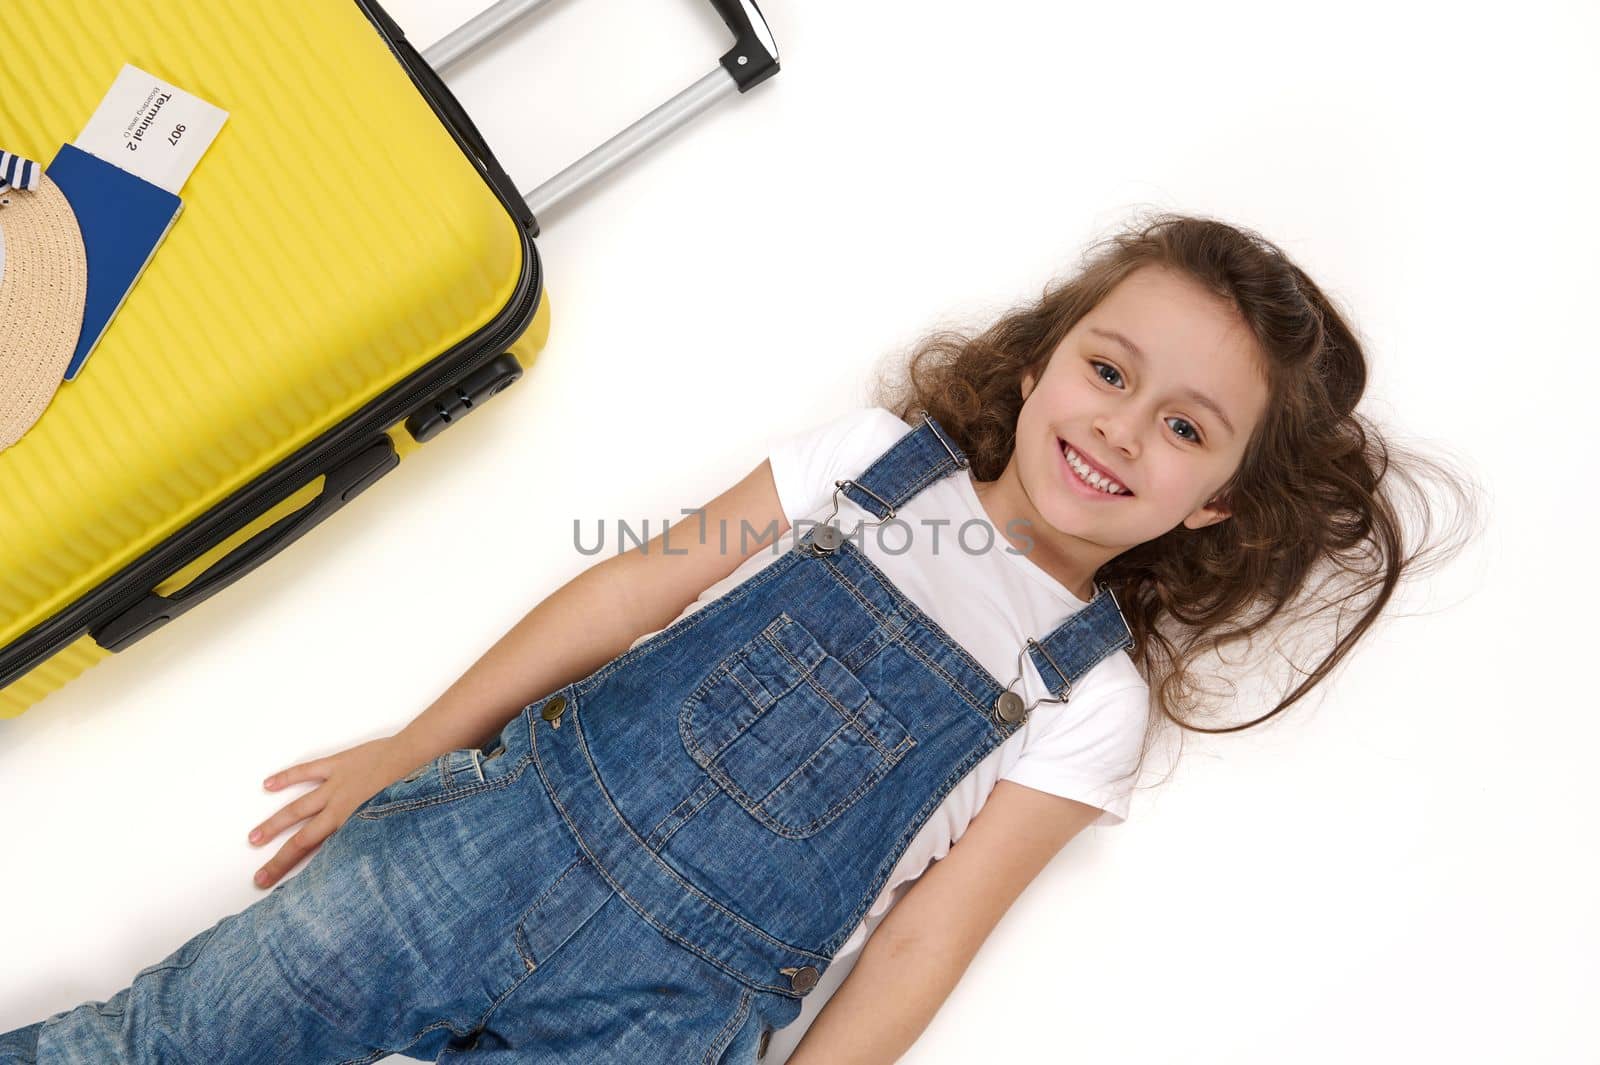 Charming little girl wearing blue denim overalls, lies on white background near her boarding pass on yellow suitcase by artgf